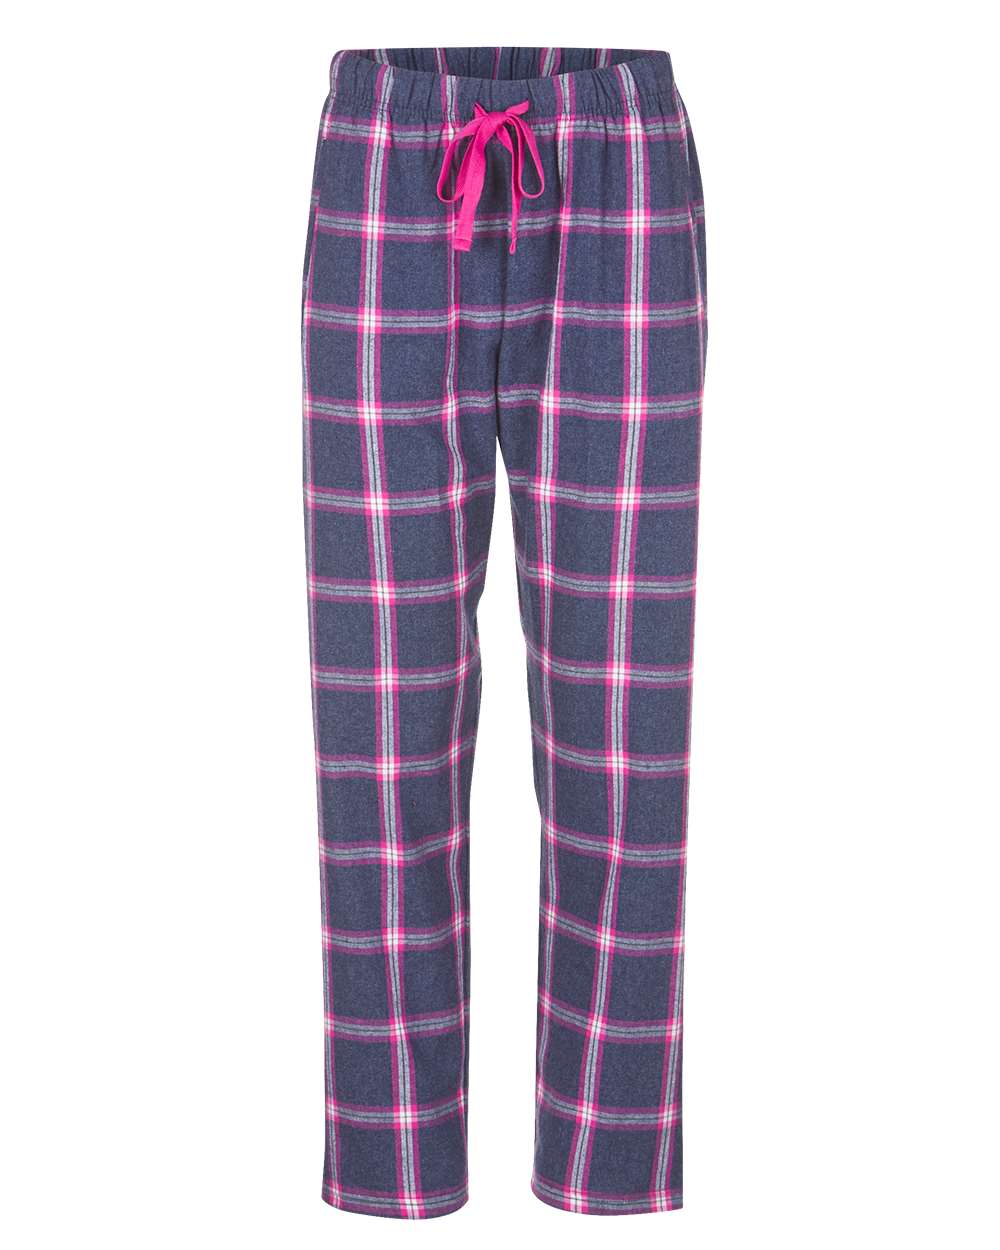 click to view Navy Pink Tomboy Plaid